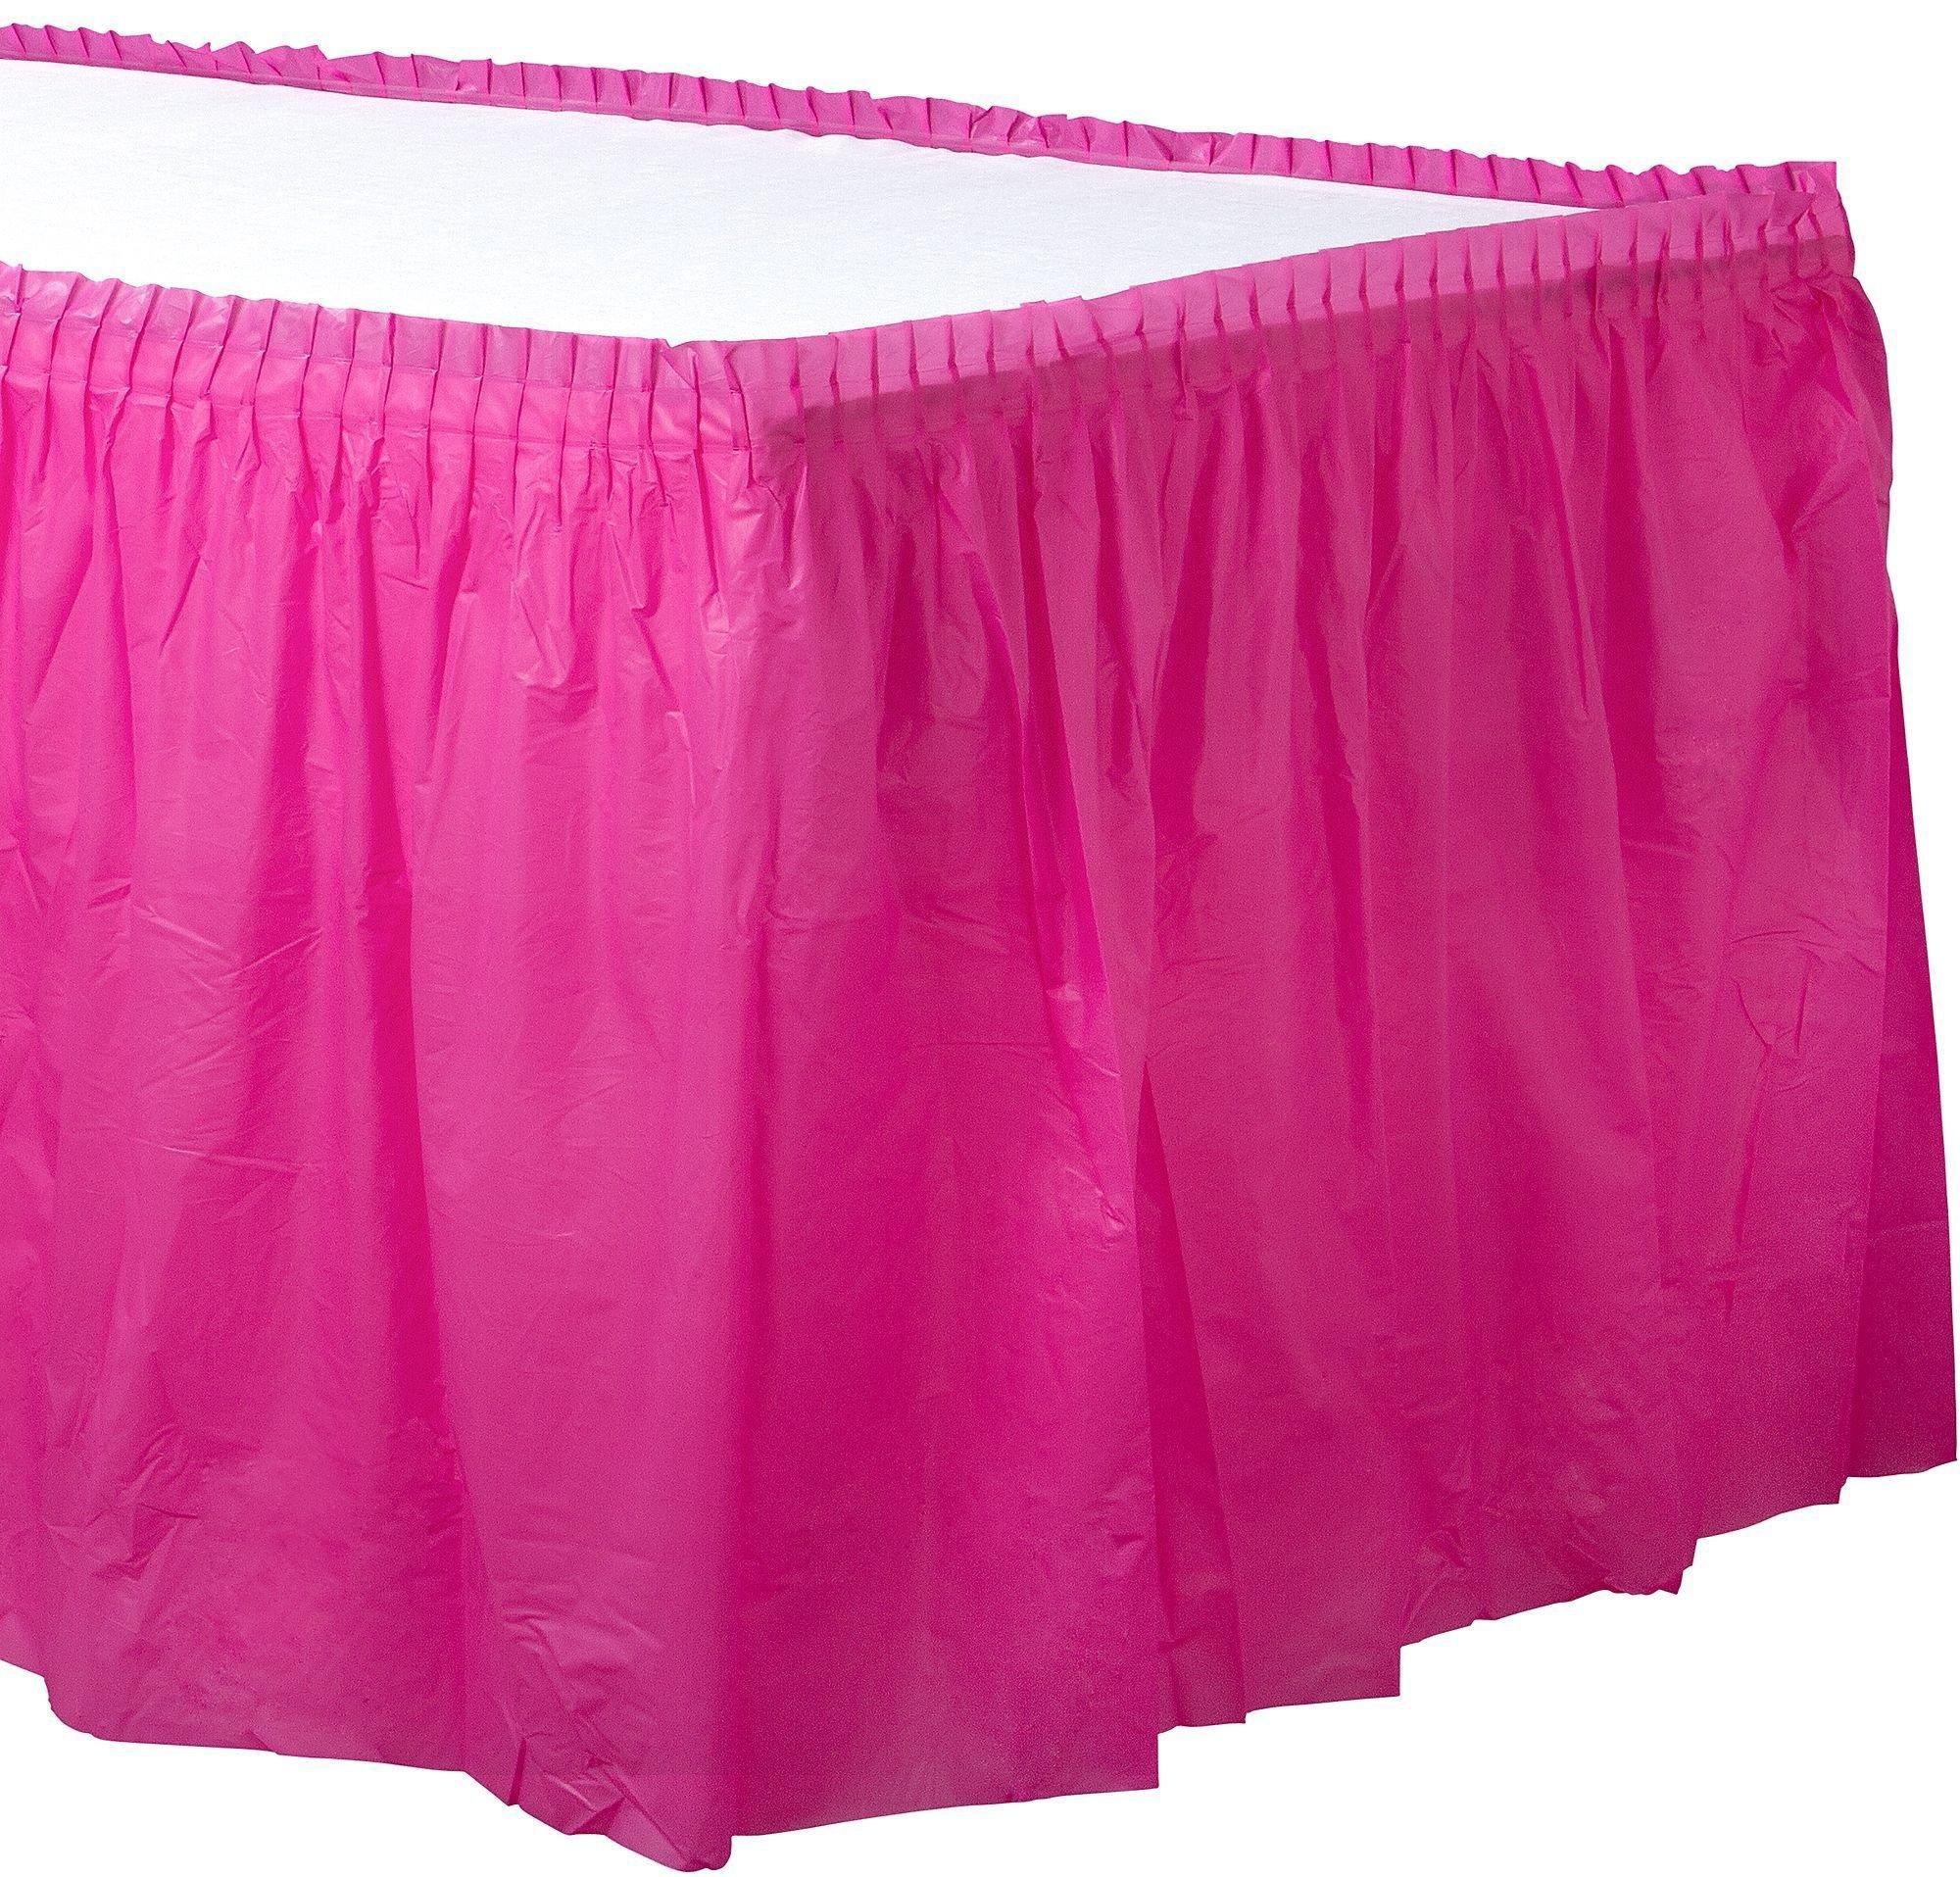 Bright Pink Plastic Table Skirt, 21ft x 29in